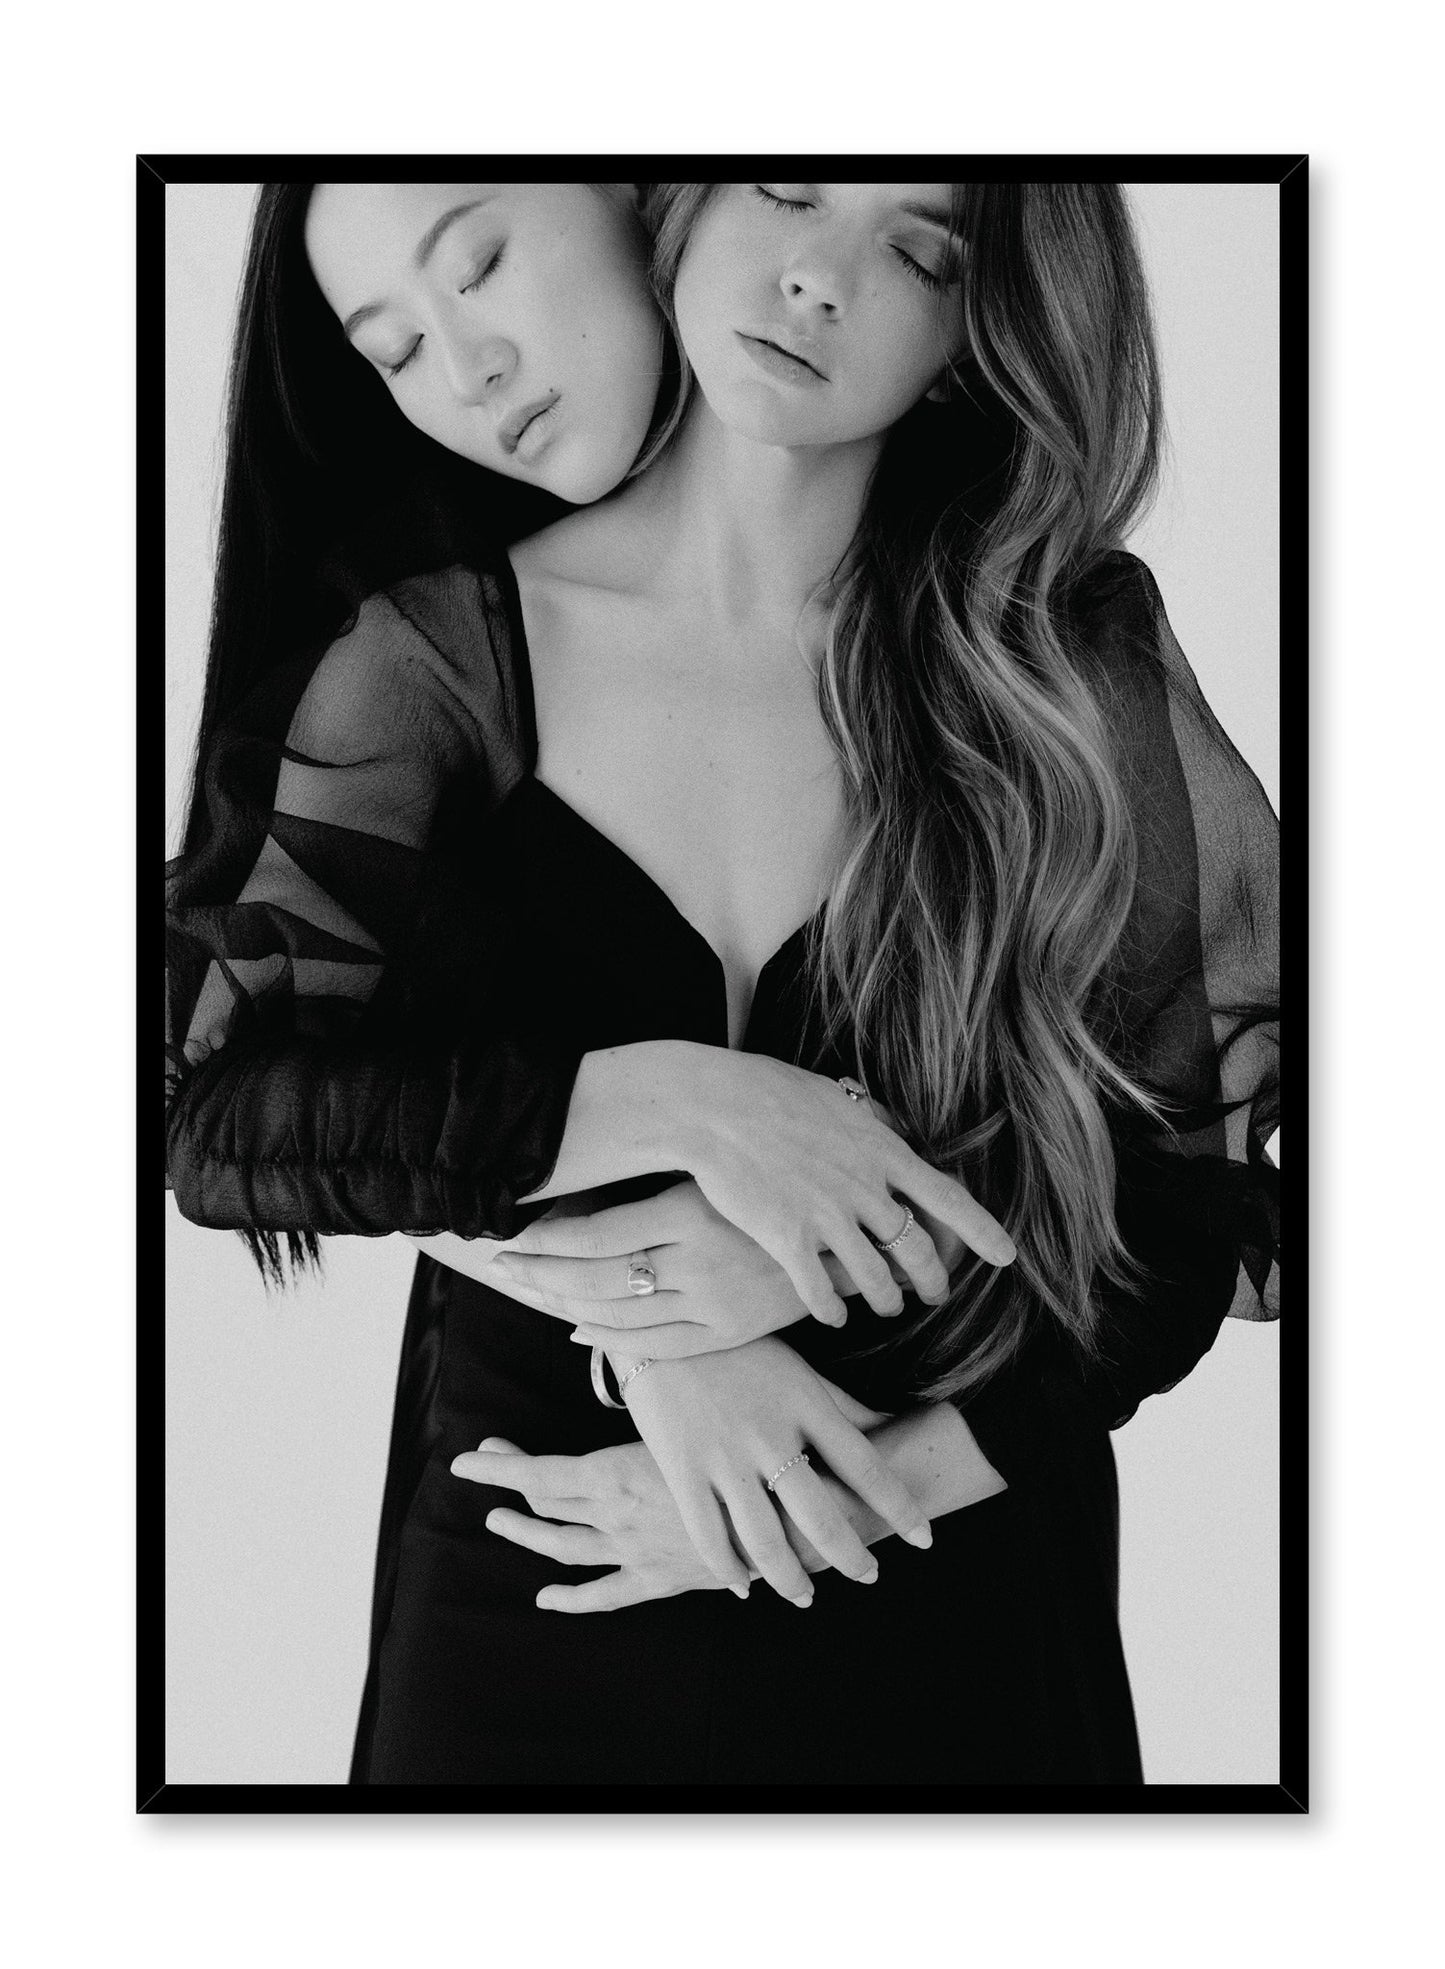 Black and white fashion photography poster by Opposite Wall with women embracing